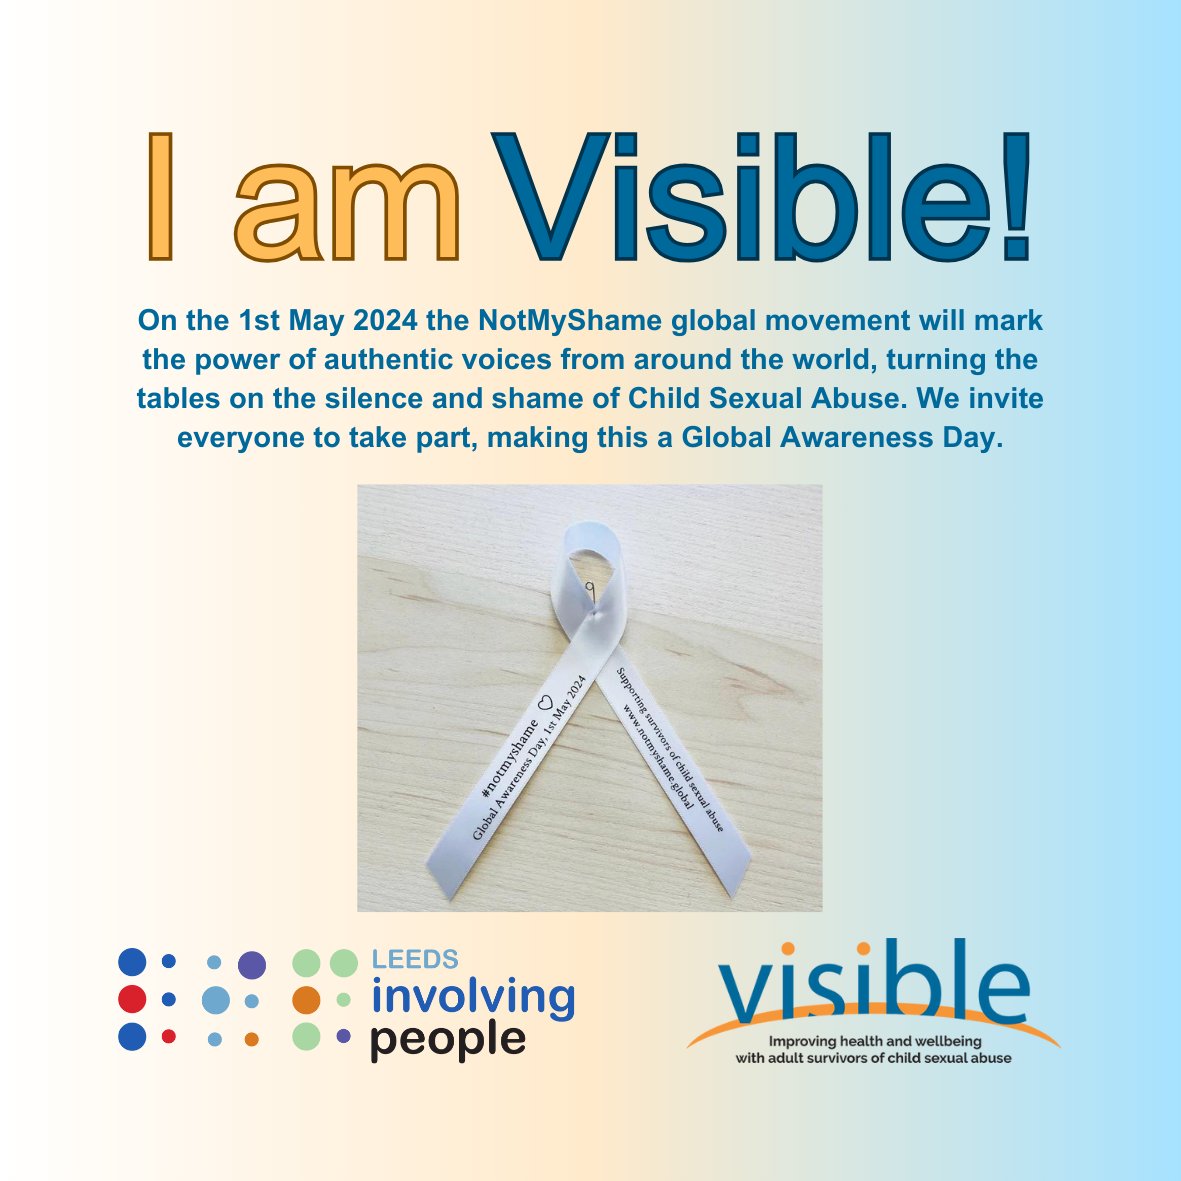 Today the #NotMyShame global movement will mark the power of authentic voices from around the world, turning the tables on the silence and shame of #ChildSexualAbuse. We invite everyone to take part, making this a Global Awareness Day. #visible #wearevisible